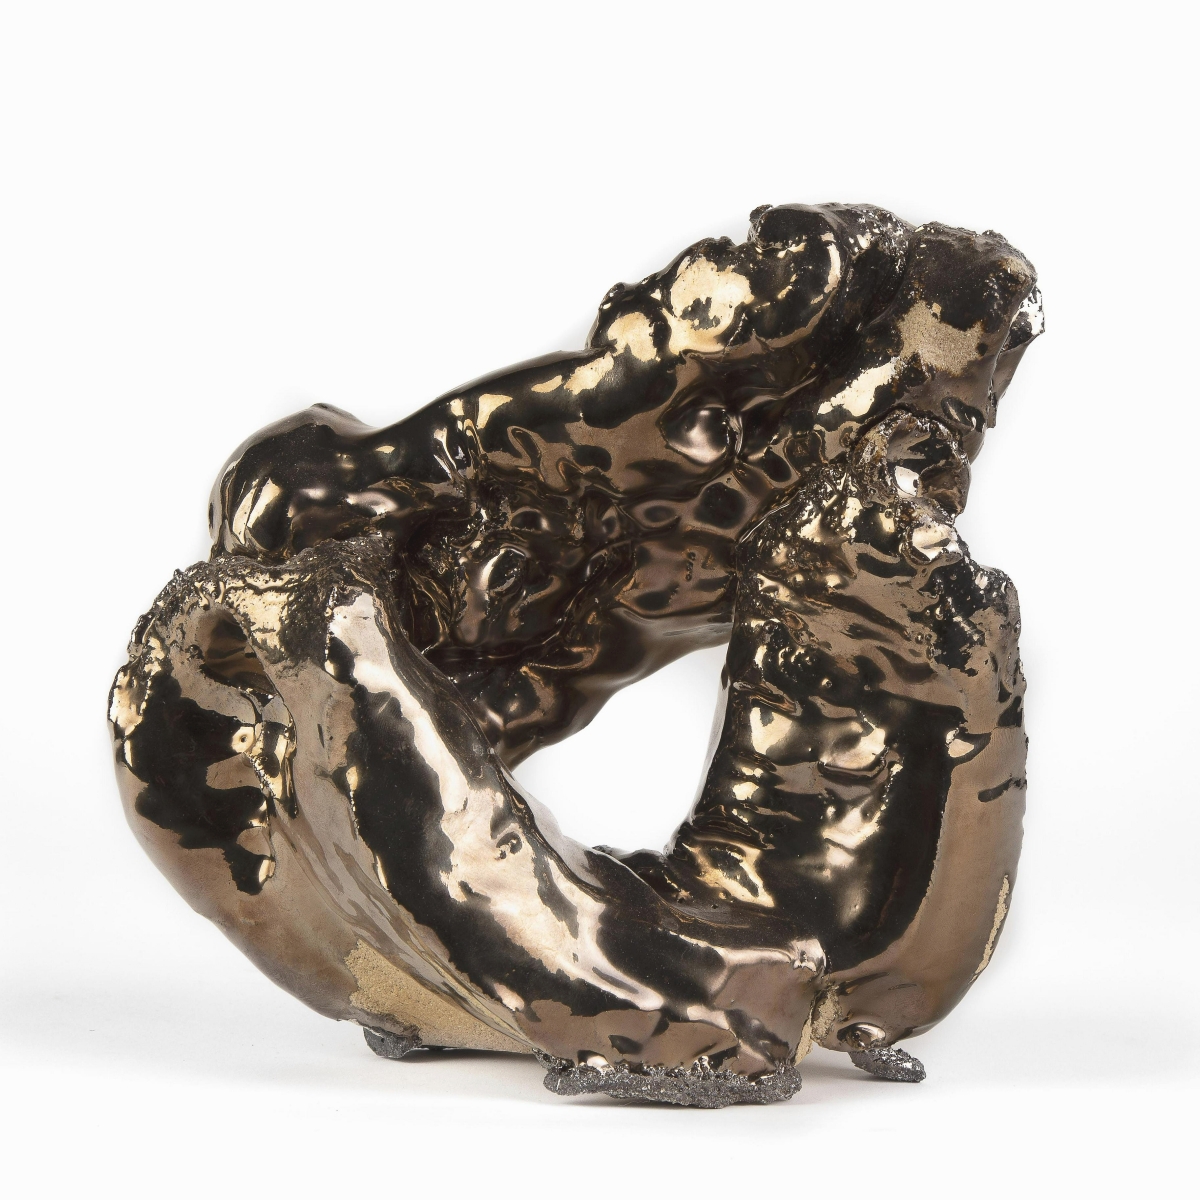 Highest among any ceramic work in the sale was a sculpture from multidisciplinary artist Lynda Benglis (b 1941). The untitled work sold for $14,160.